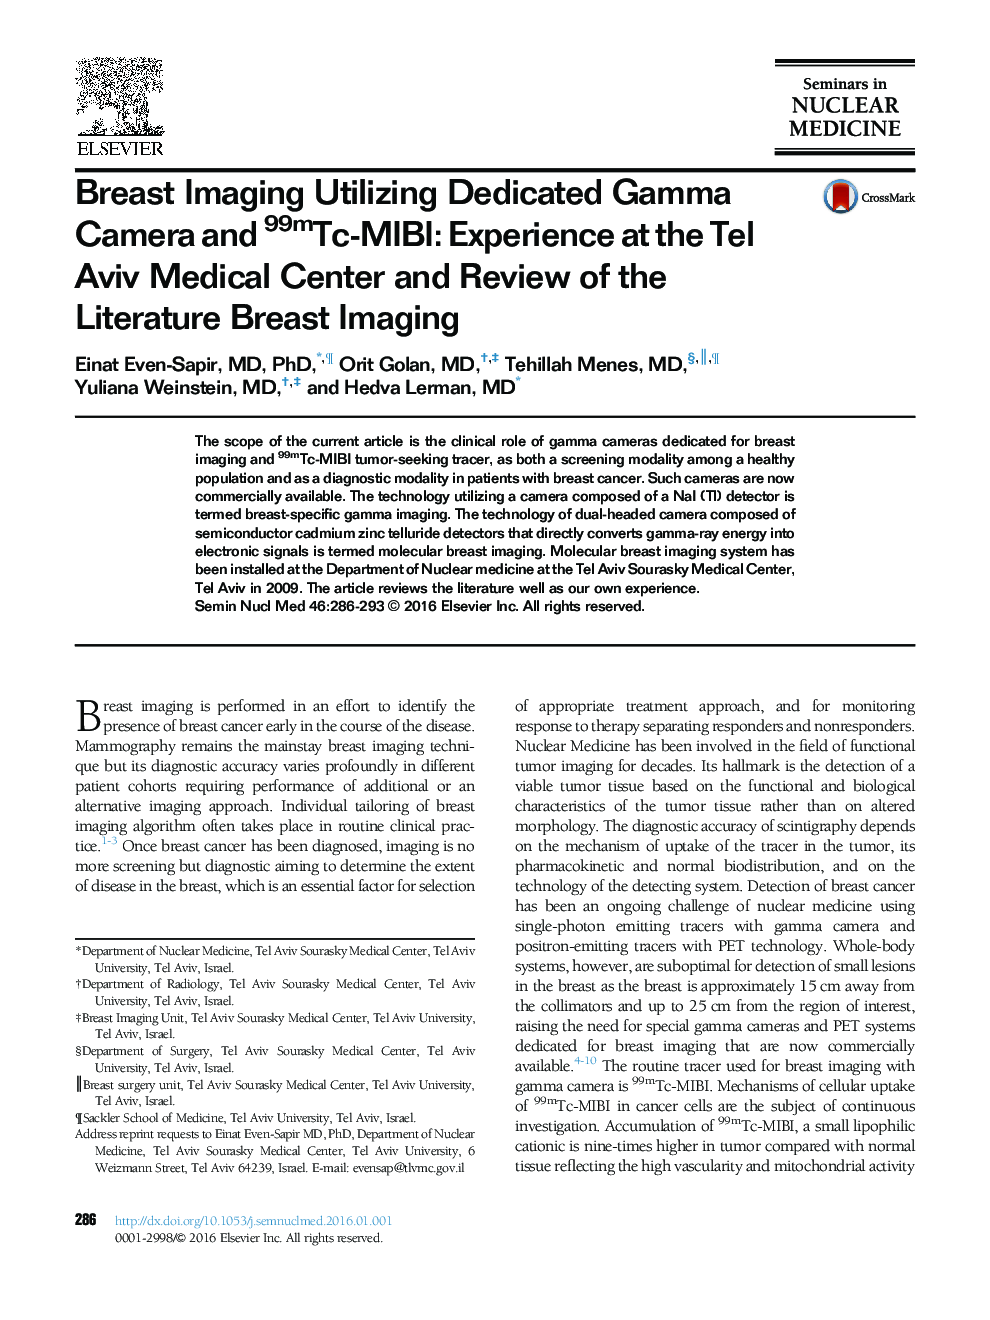 Breast Imaging Utilizing Dedicated Gamma Camera and 99mTc-MIBI: Experience at the Tel Aviv Medical Center and Review of the Literature Breast Imaging